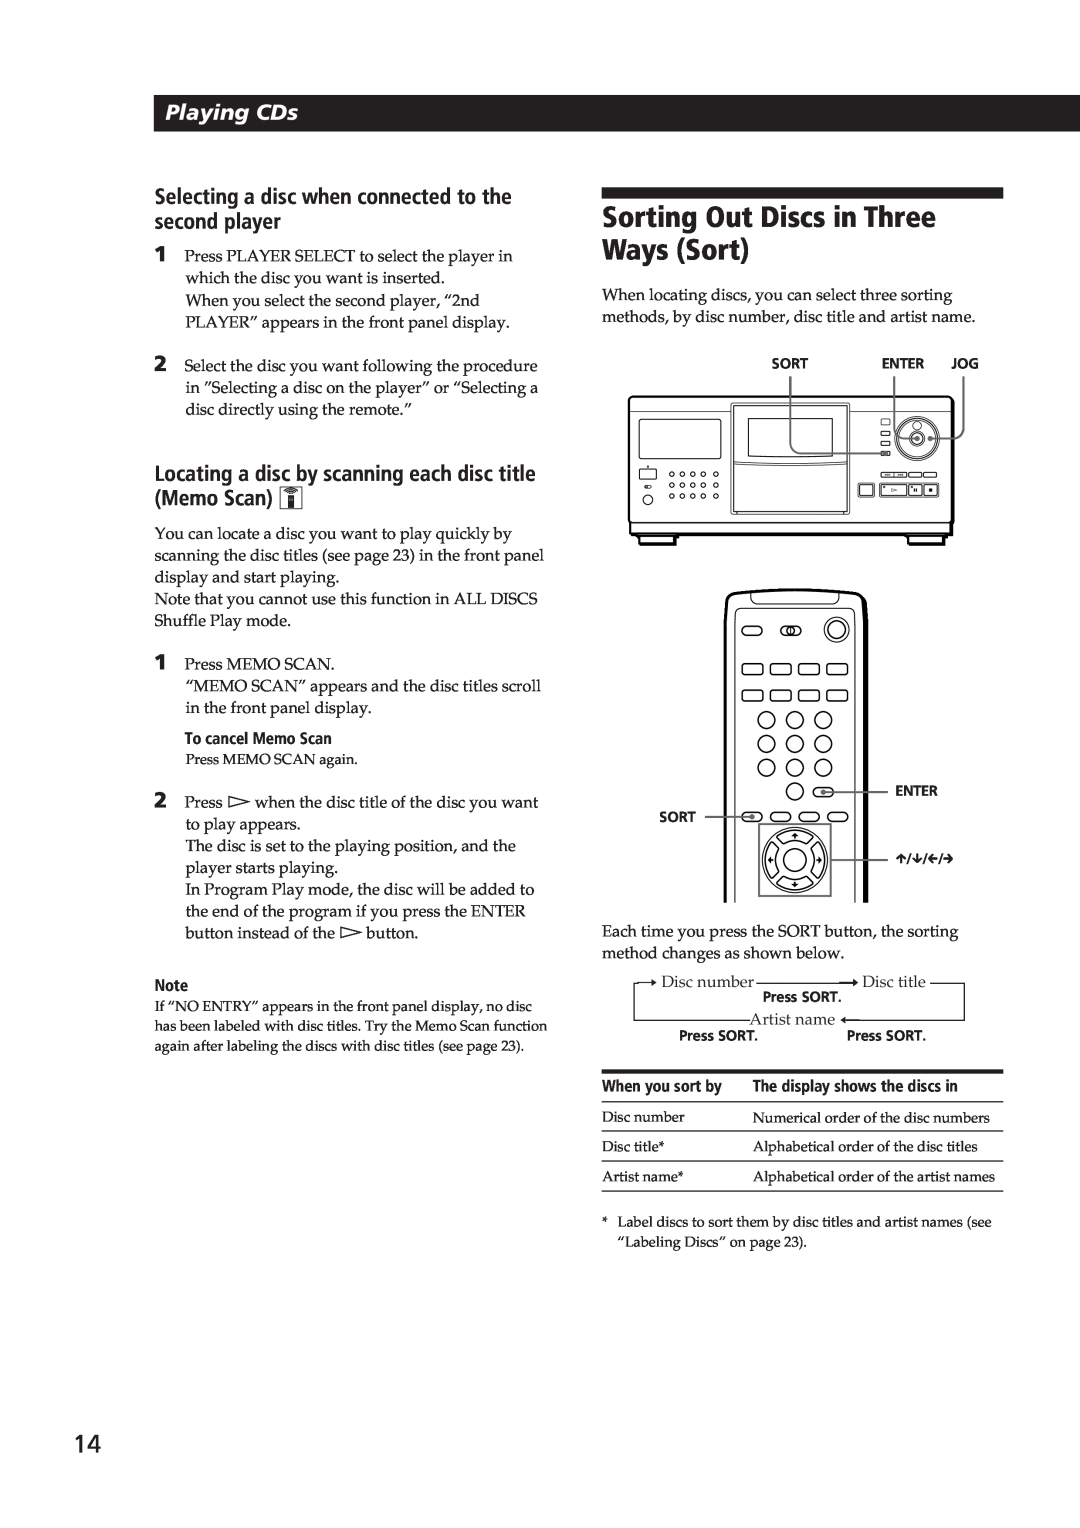 Sony Ericsson CDP-CX270 manual Sorting Out Discs in Three Ways Sort, Playing CDs, To cancel Memo Scan, When you sort by 